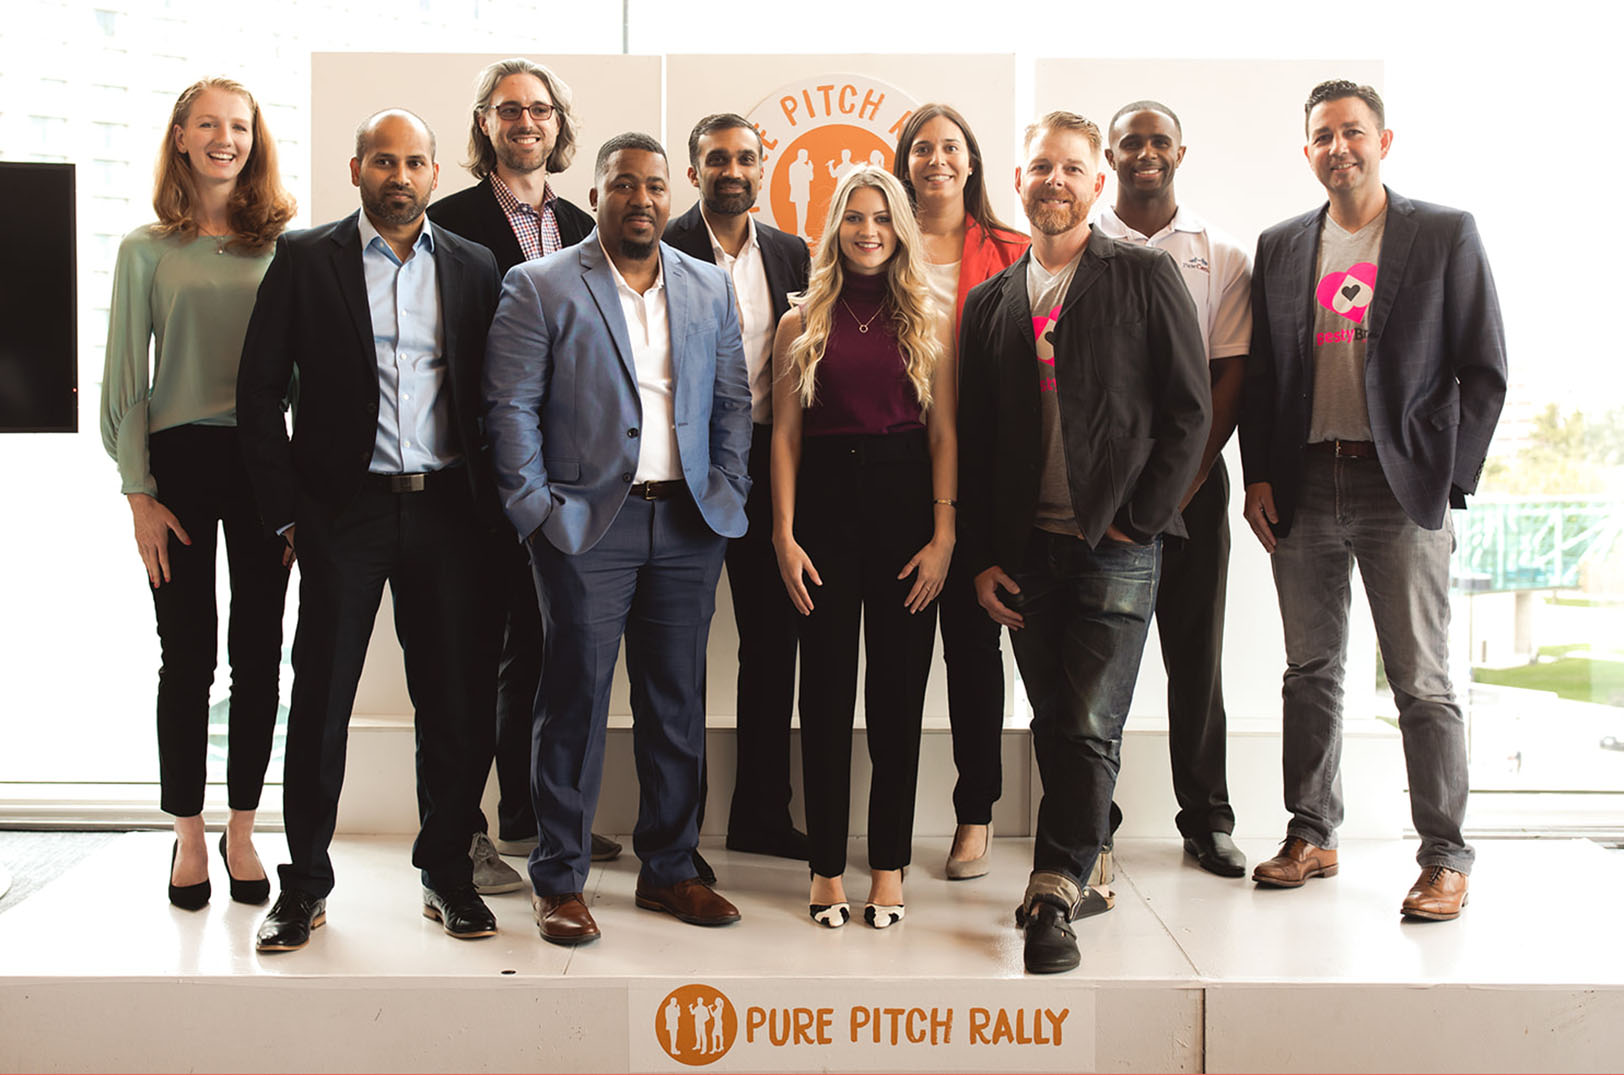 Baiting the sharks: How much on-the-spot funding did founders catch at Pure Pitch Rally?